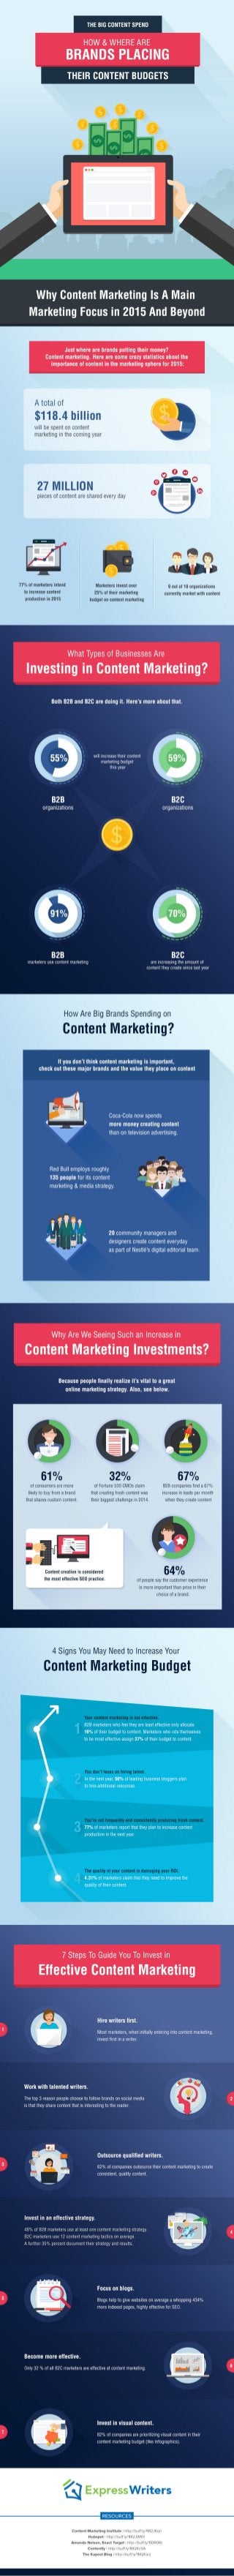 The Big Content Spend - Infographic